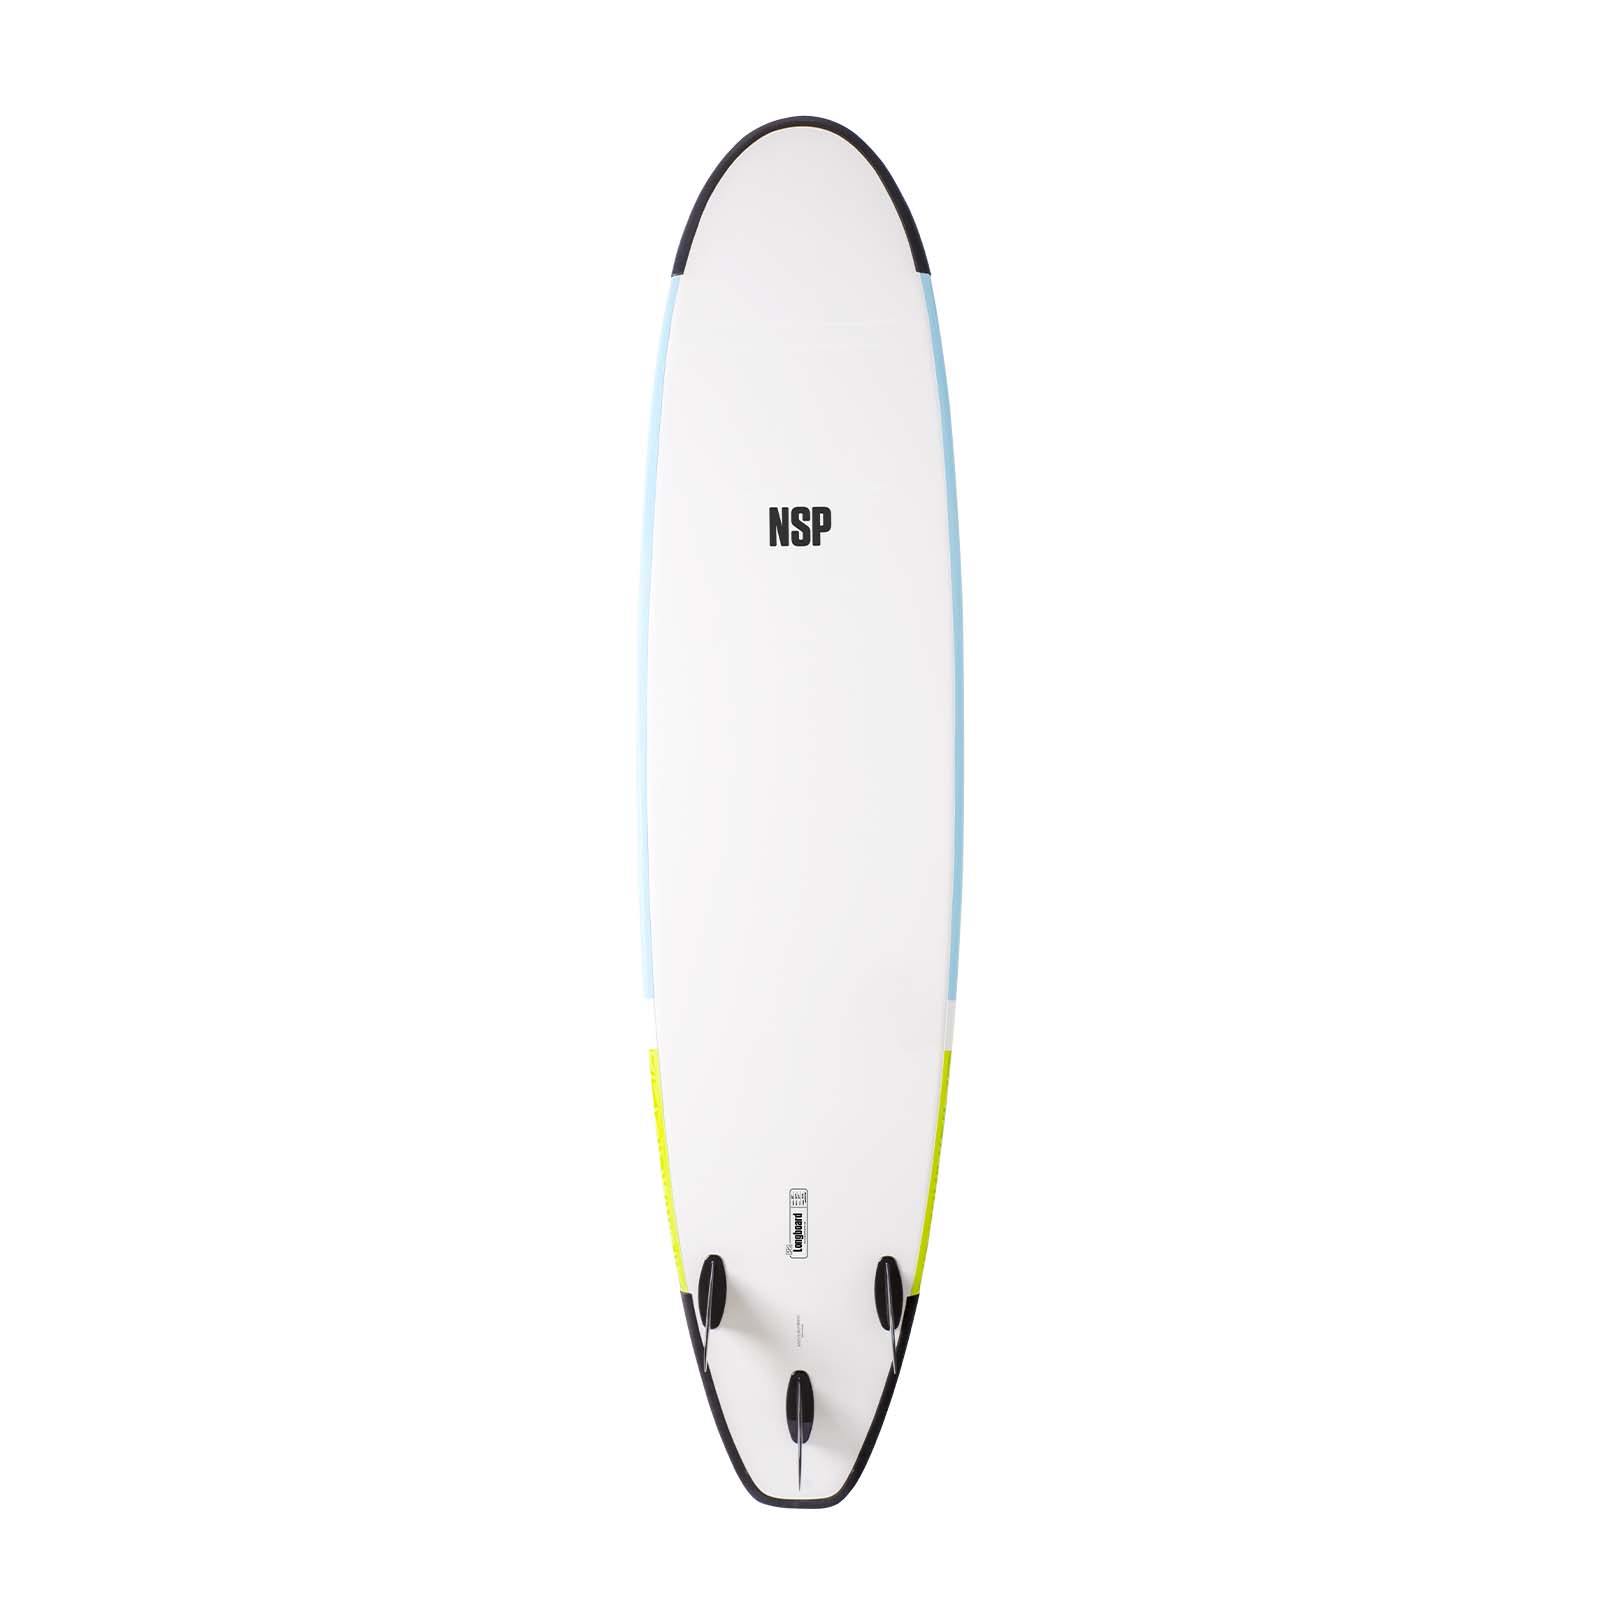 The P2 Soft Longboard - Shaped by NSP Surfboards